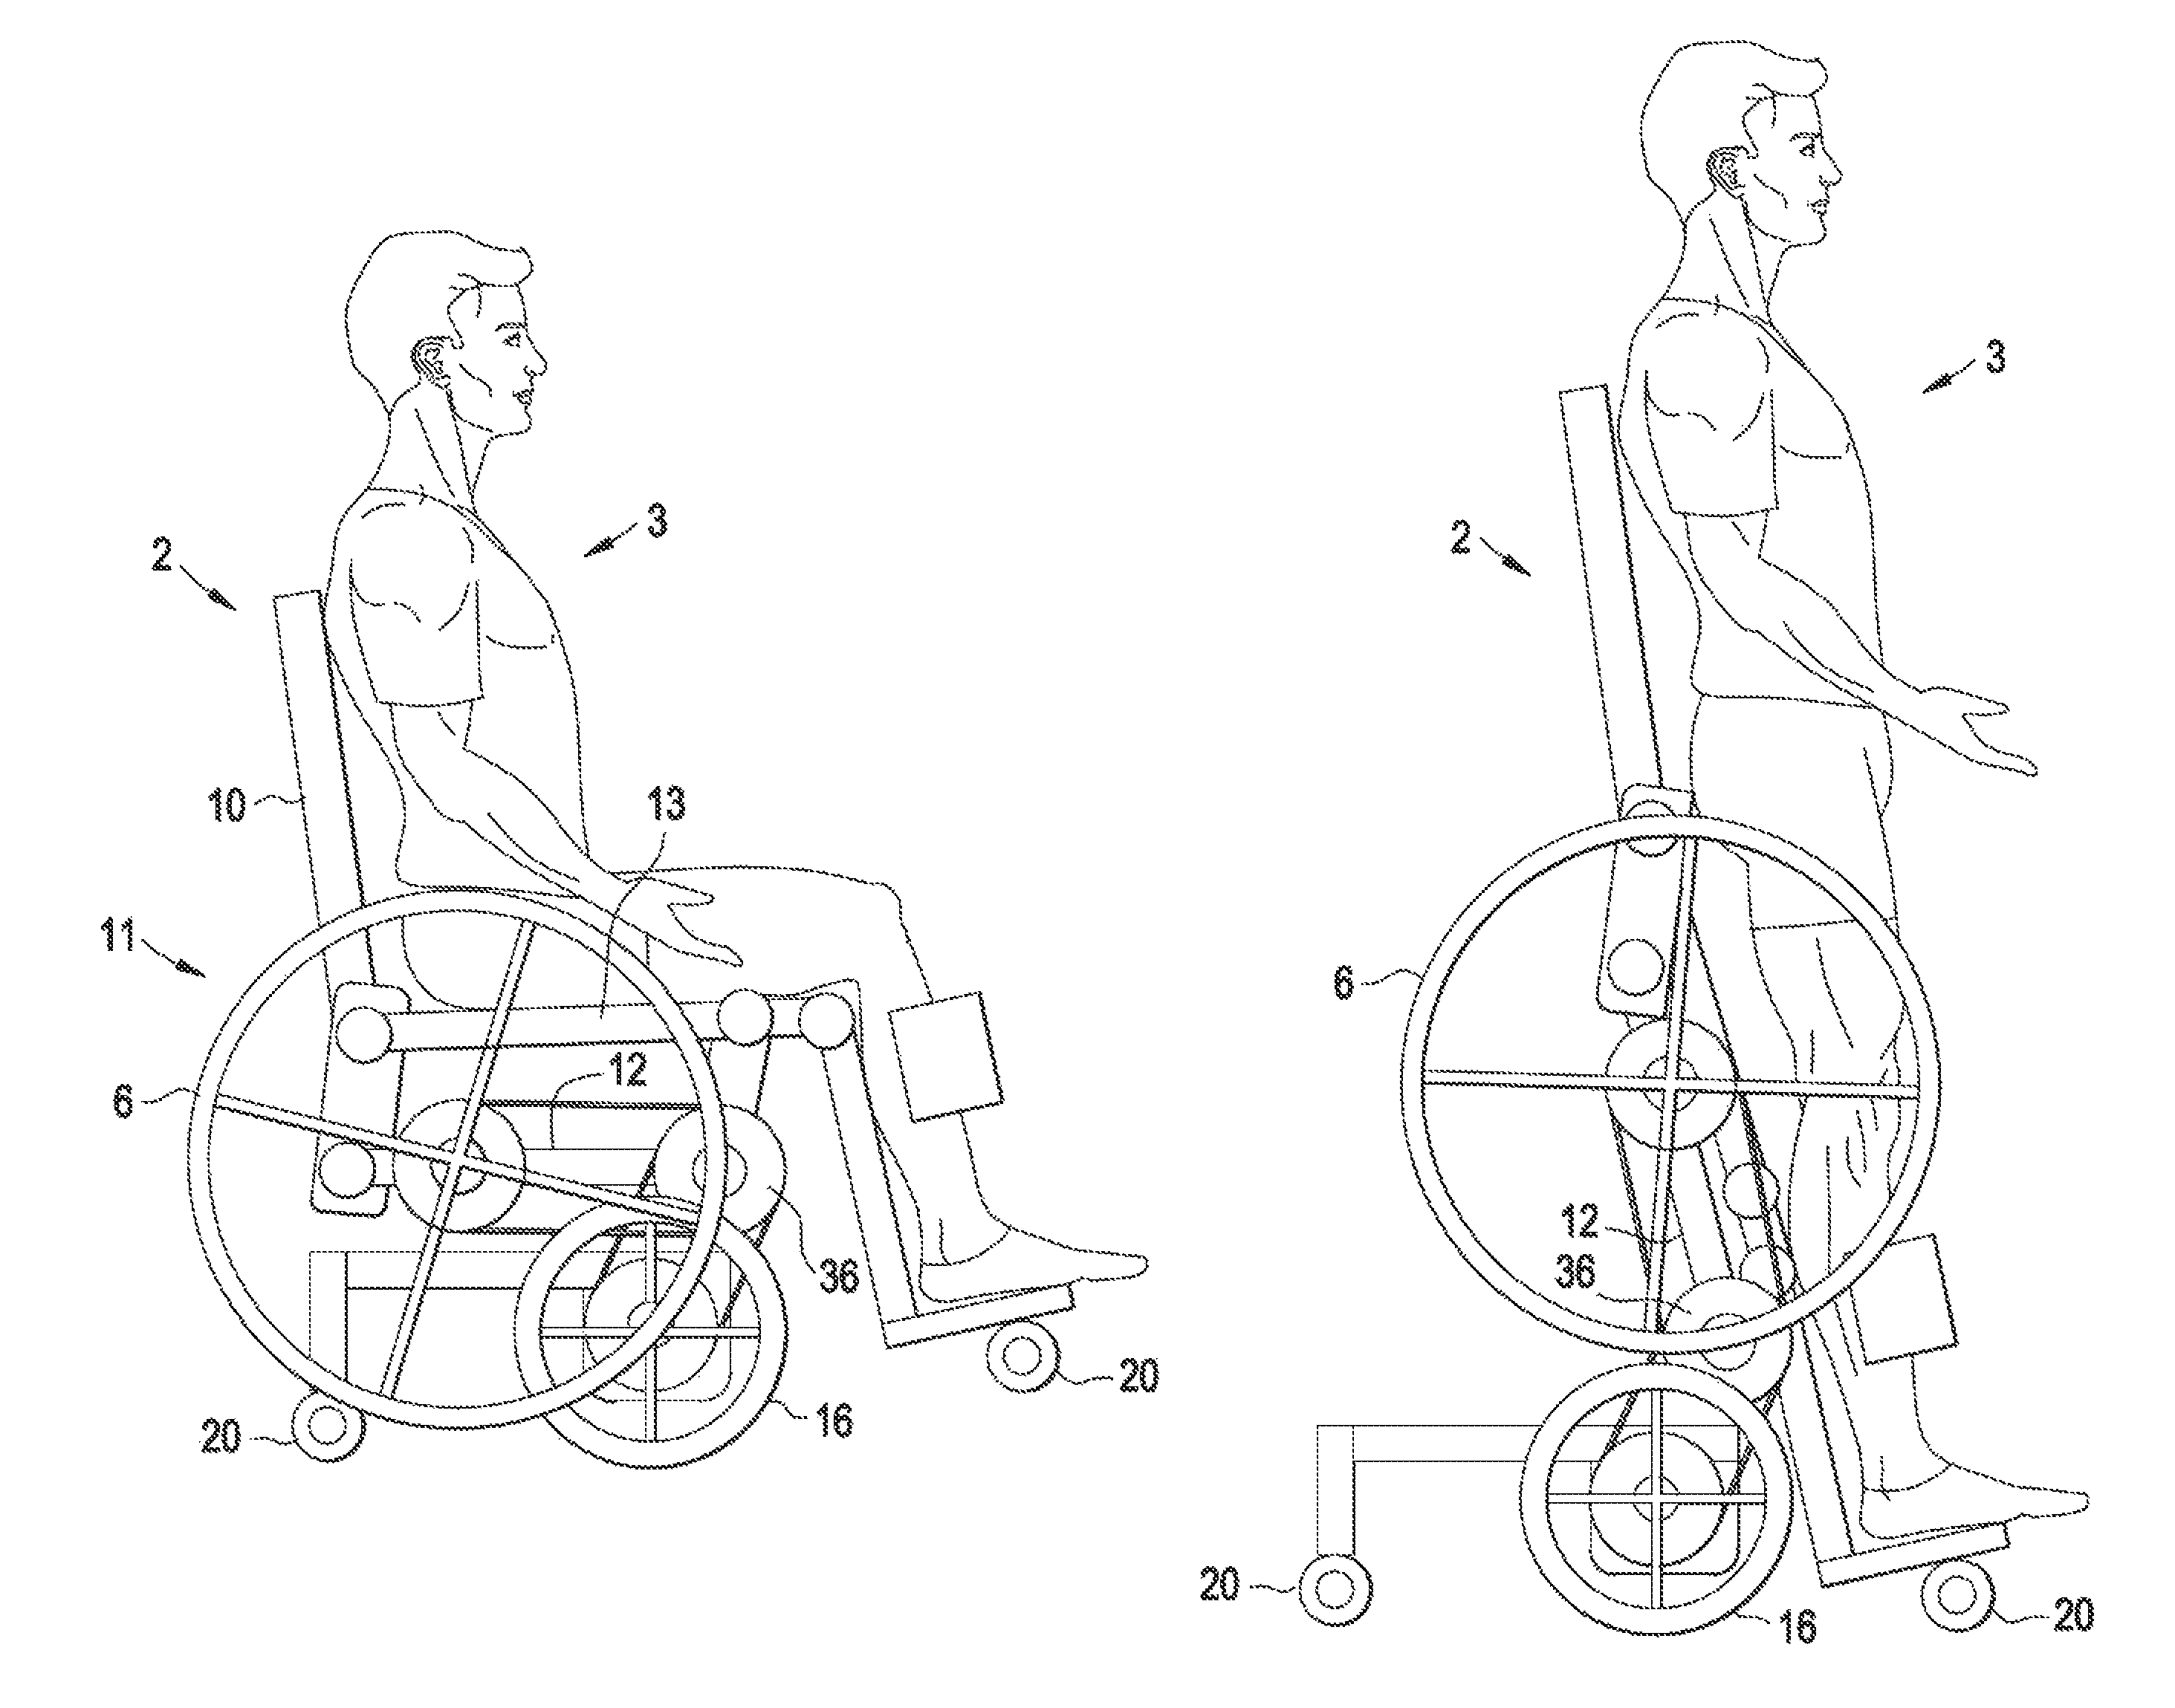 Mobile manual standing wheelchair